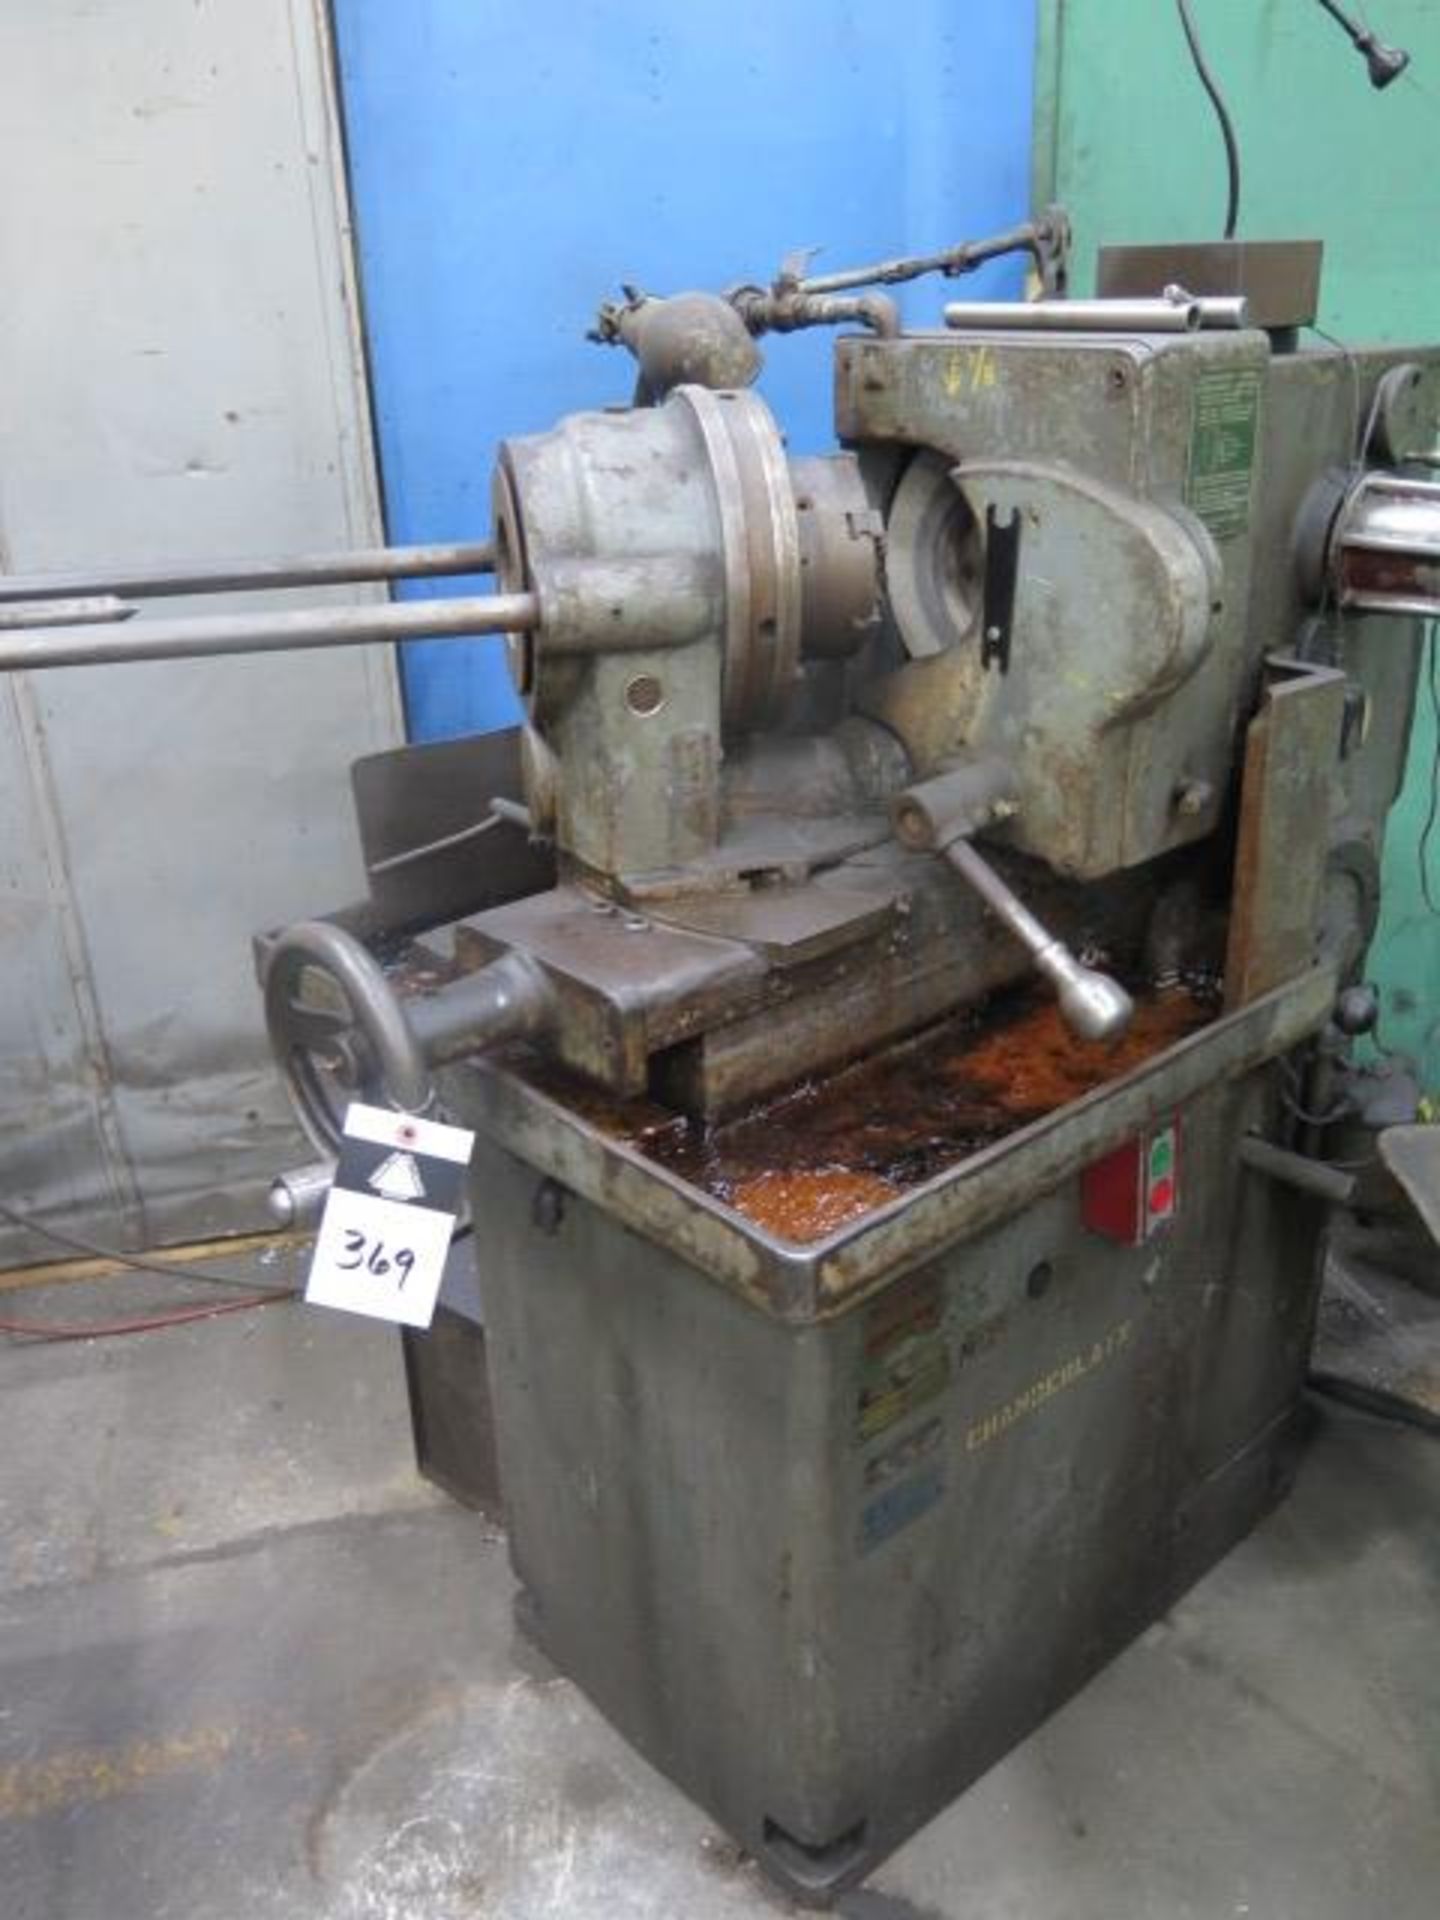 Oliver Adrian mdl. 600 Large Diameter Drill Sharpener s/n G-6618 (SOLD AS-IS - NO WARRANTY) - Image 2 of 8